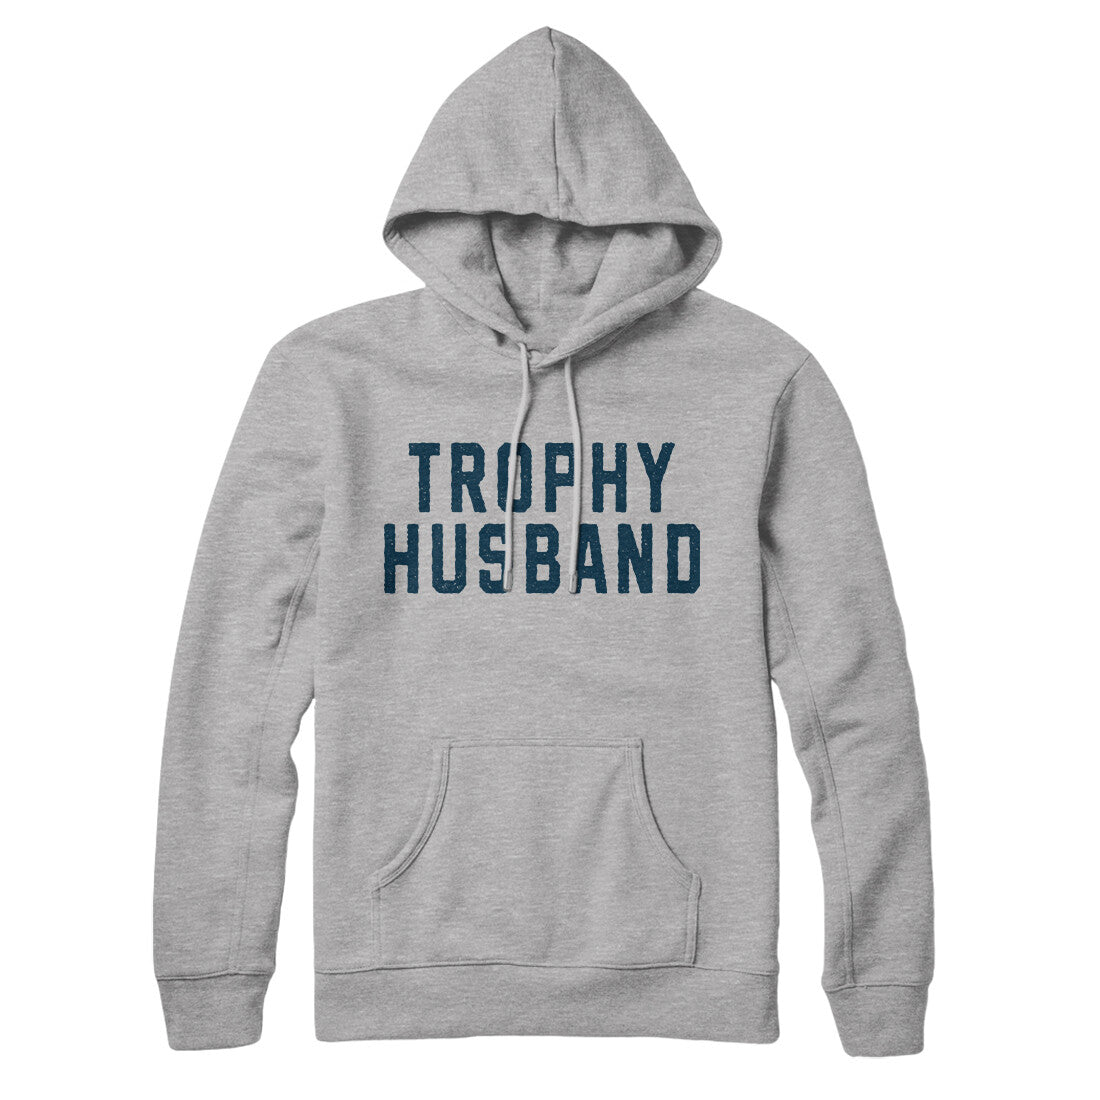 Trophy Husband in Heather Grey Color